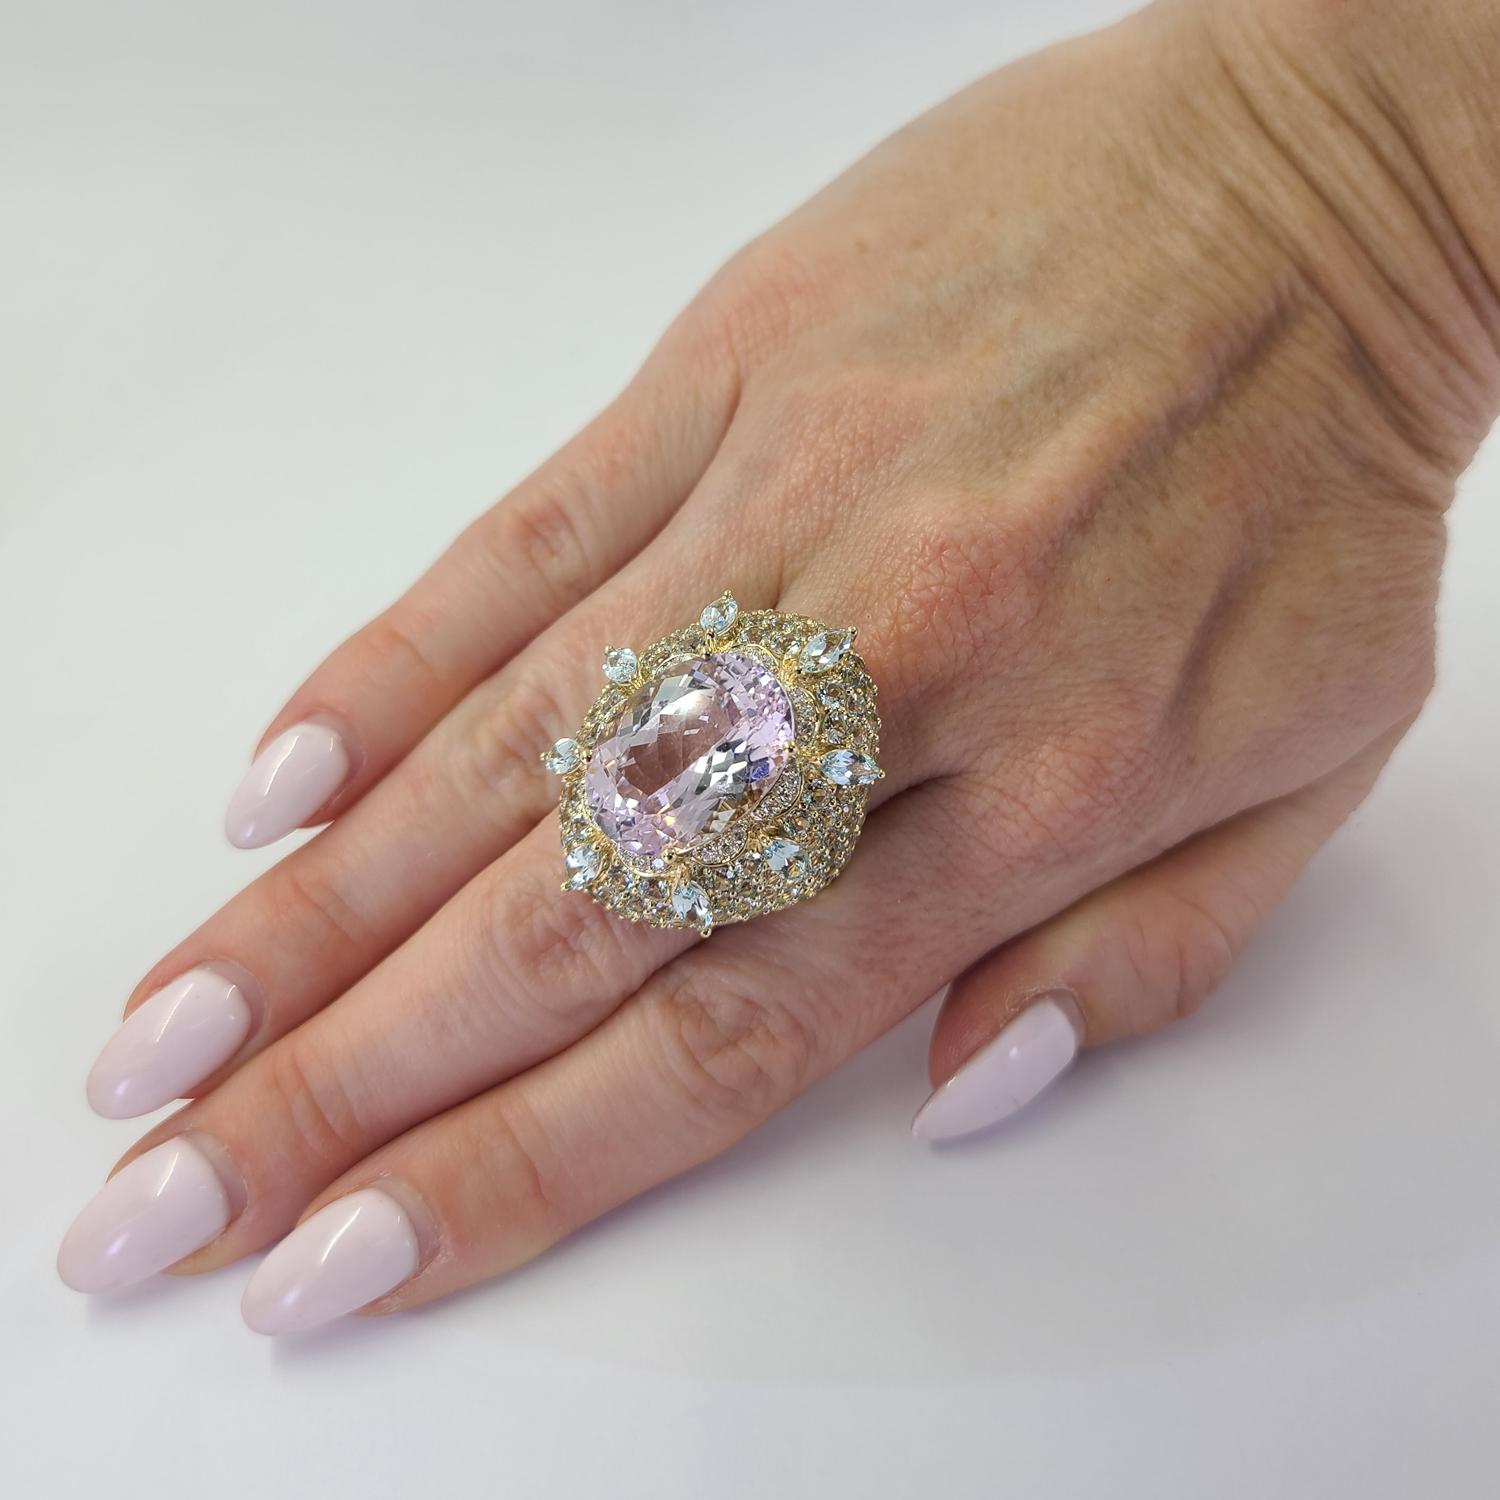 Exceptional 14 Karat Yellow Gold Cocktail Ring Featuring A Large 18 Carat Oval Cut Kunzite Accented By 162 Aquamarines Totaling Approximately 10 Carats, and 24 Round Brilliant Cut Diamonds of VS Clarity and G/H Color Totaling 0.12 Carats. Current